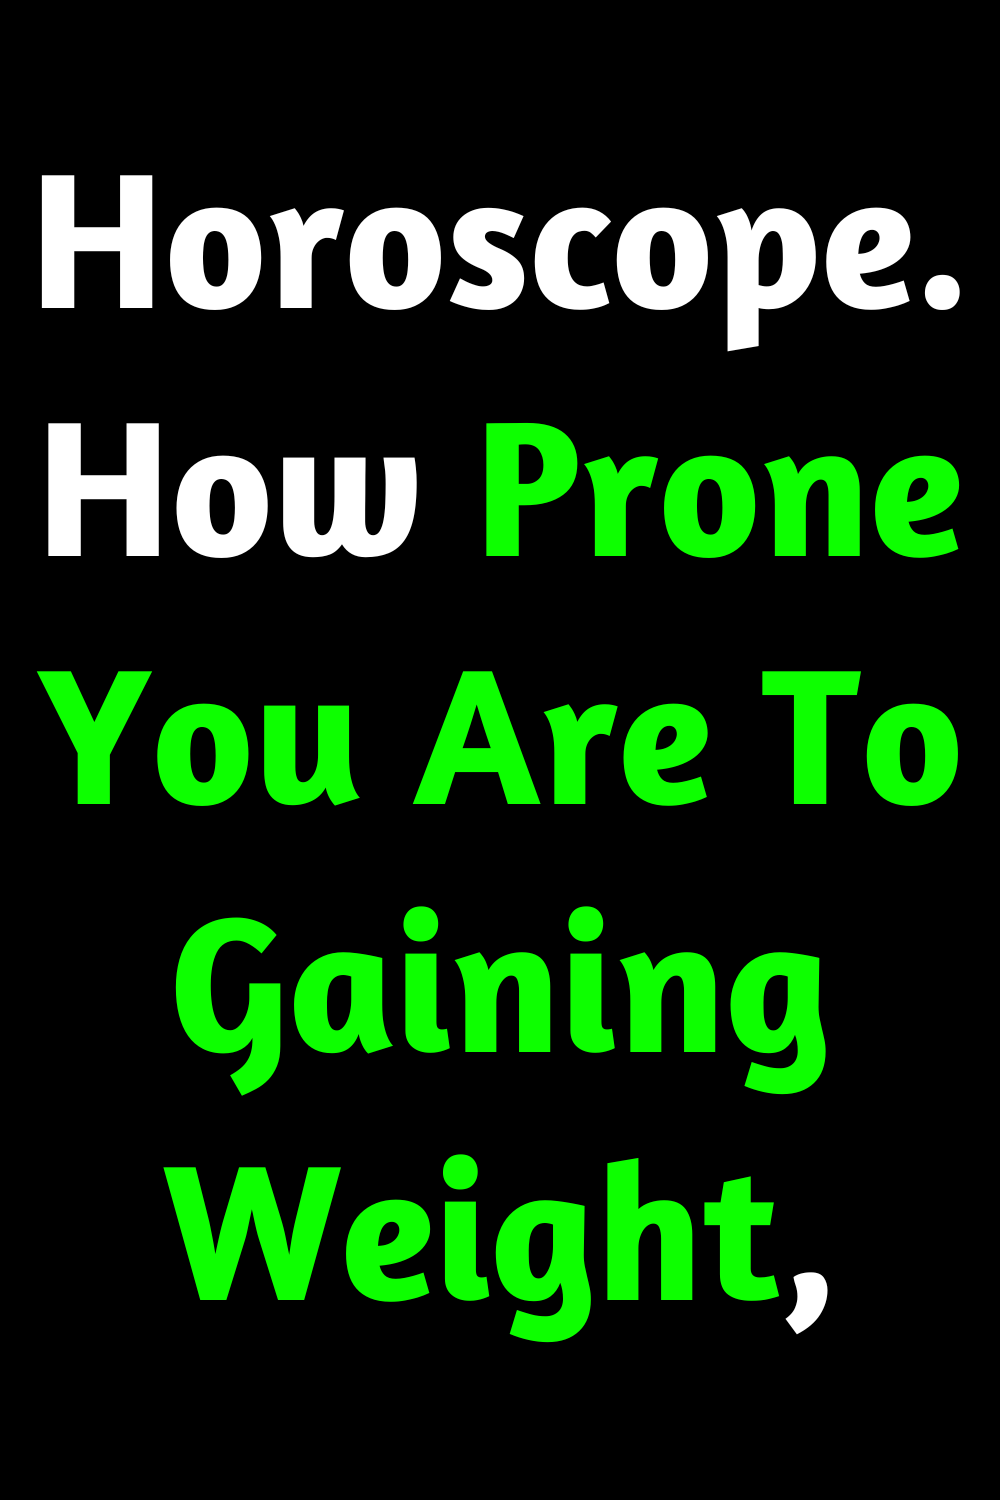 Horoscope. How Prone You Are To Gaining Weight, Depend On Your Sign